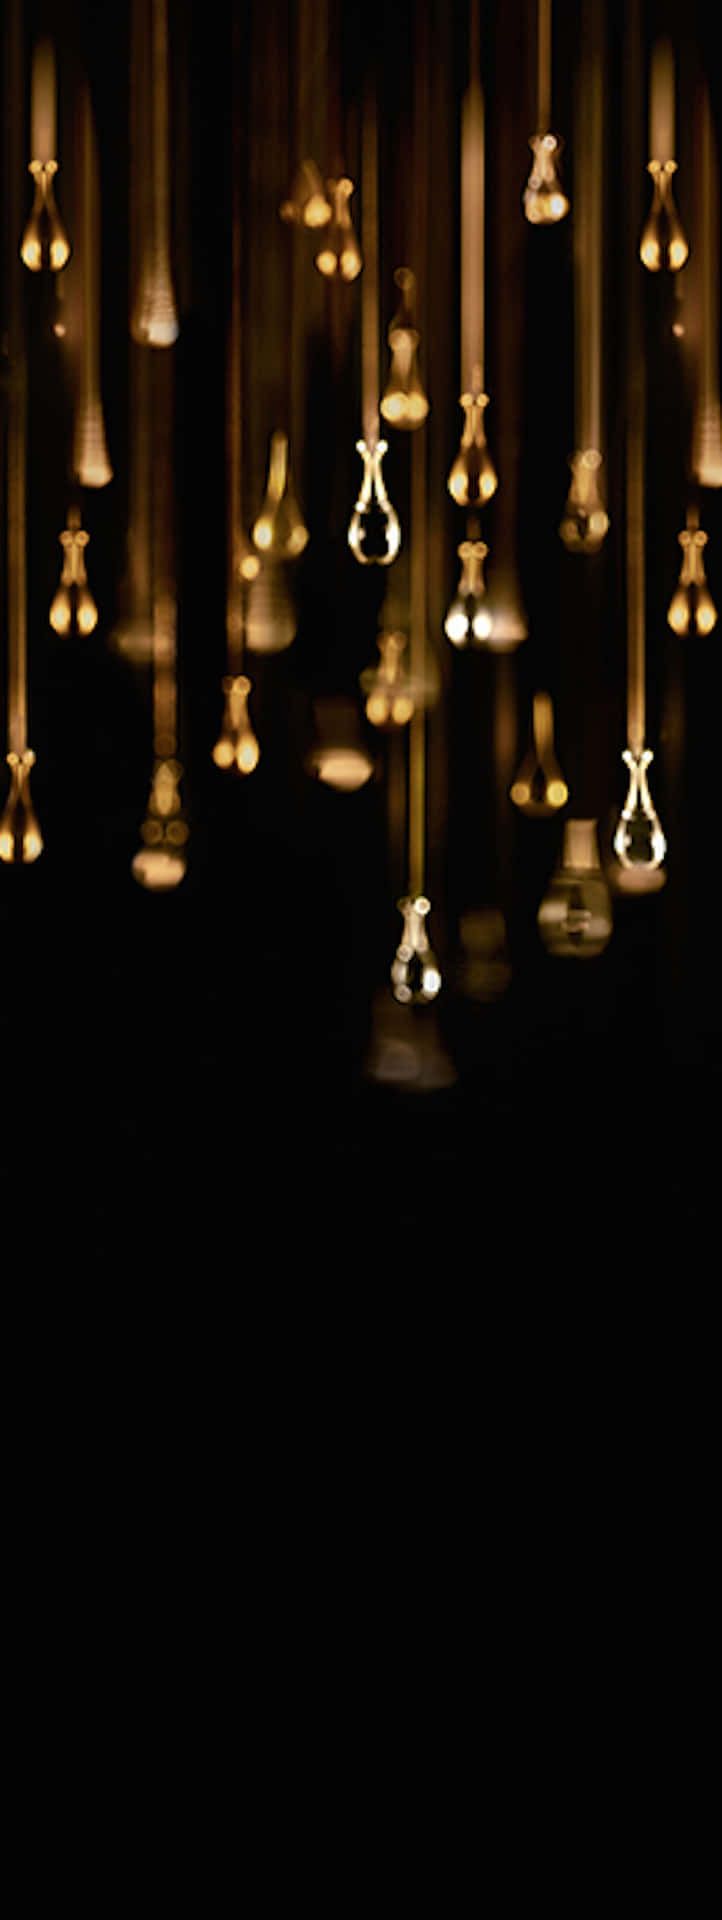 Download this free wallpaper with cool dark background and hanging lightbulbs. - Gold